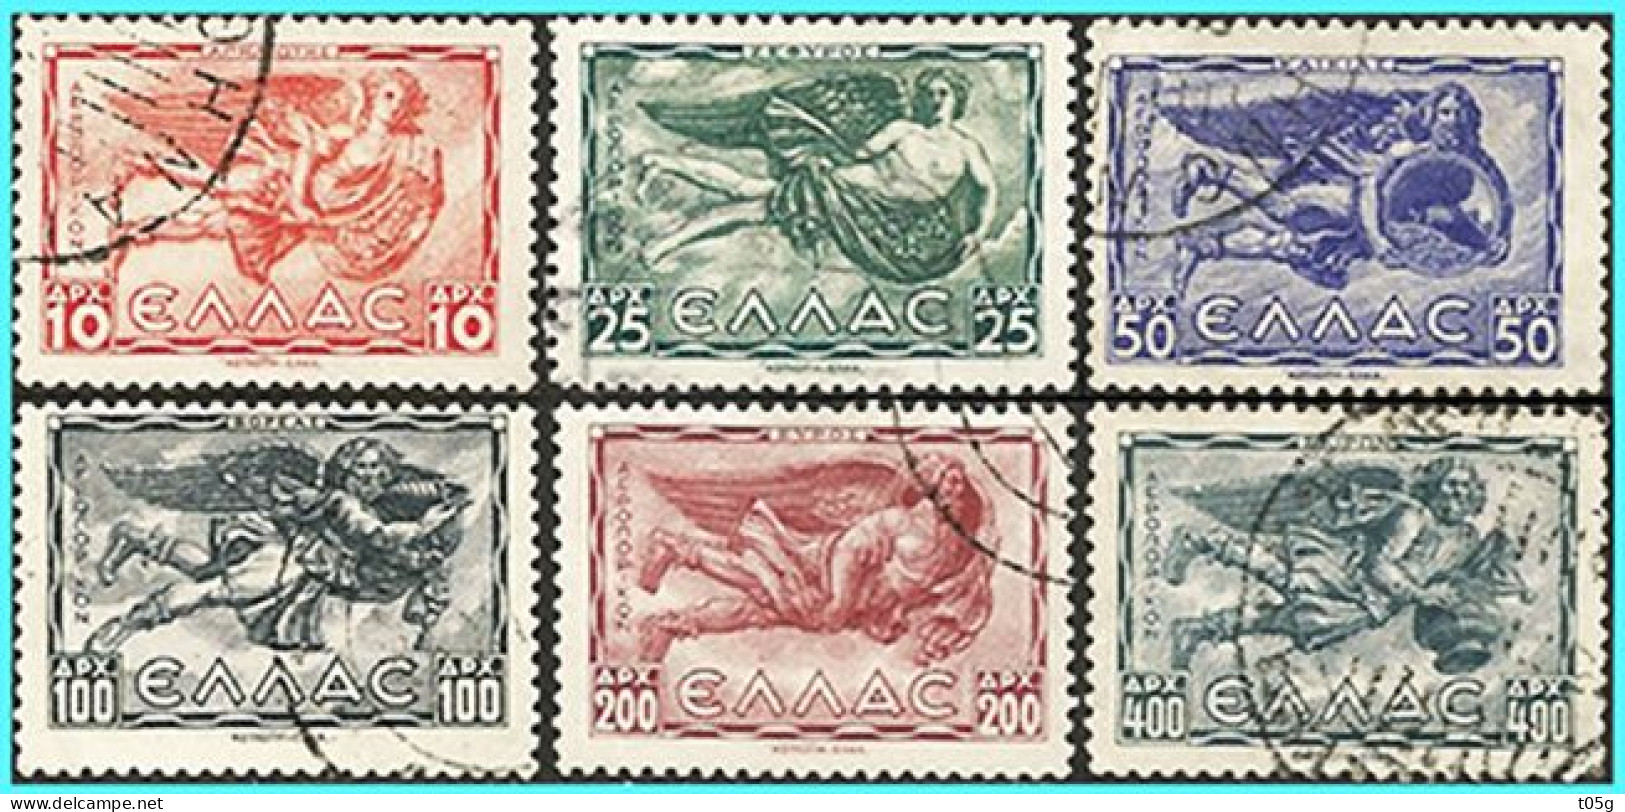 GREECE-GRECE-HELLAS- AIRPOST STAMPS 1943 : Winds Compl Set Used - Oblitérés